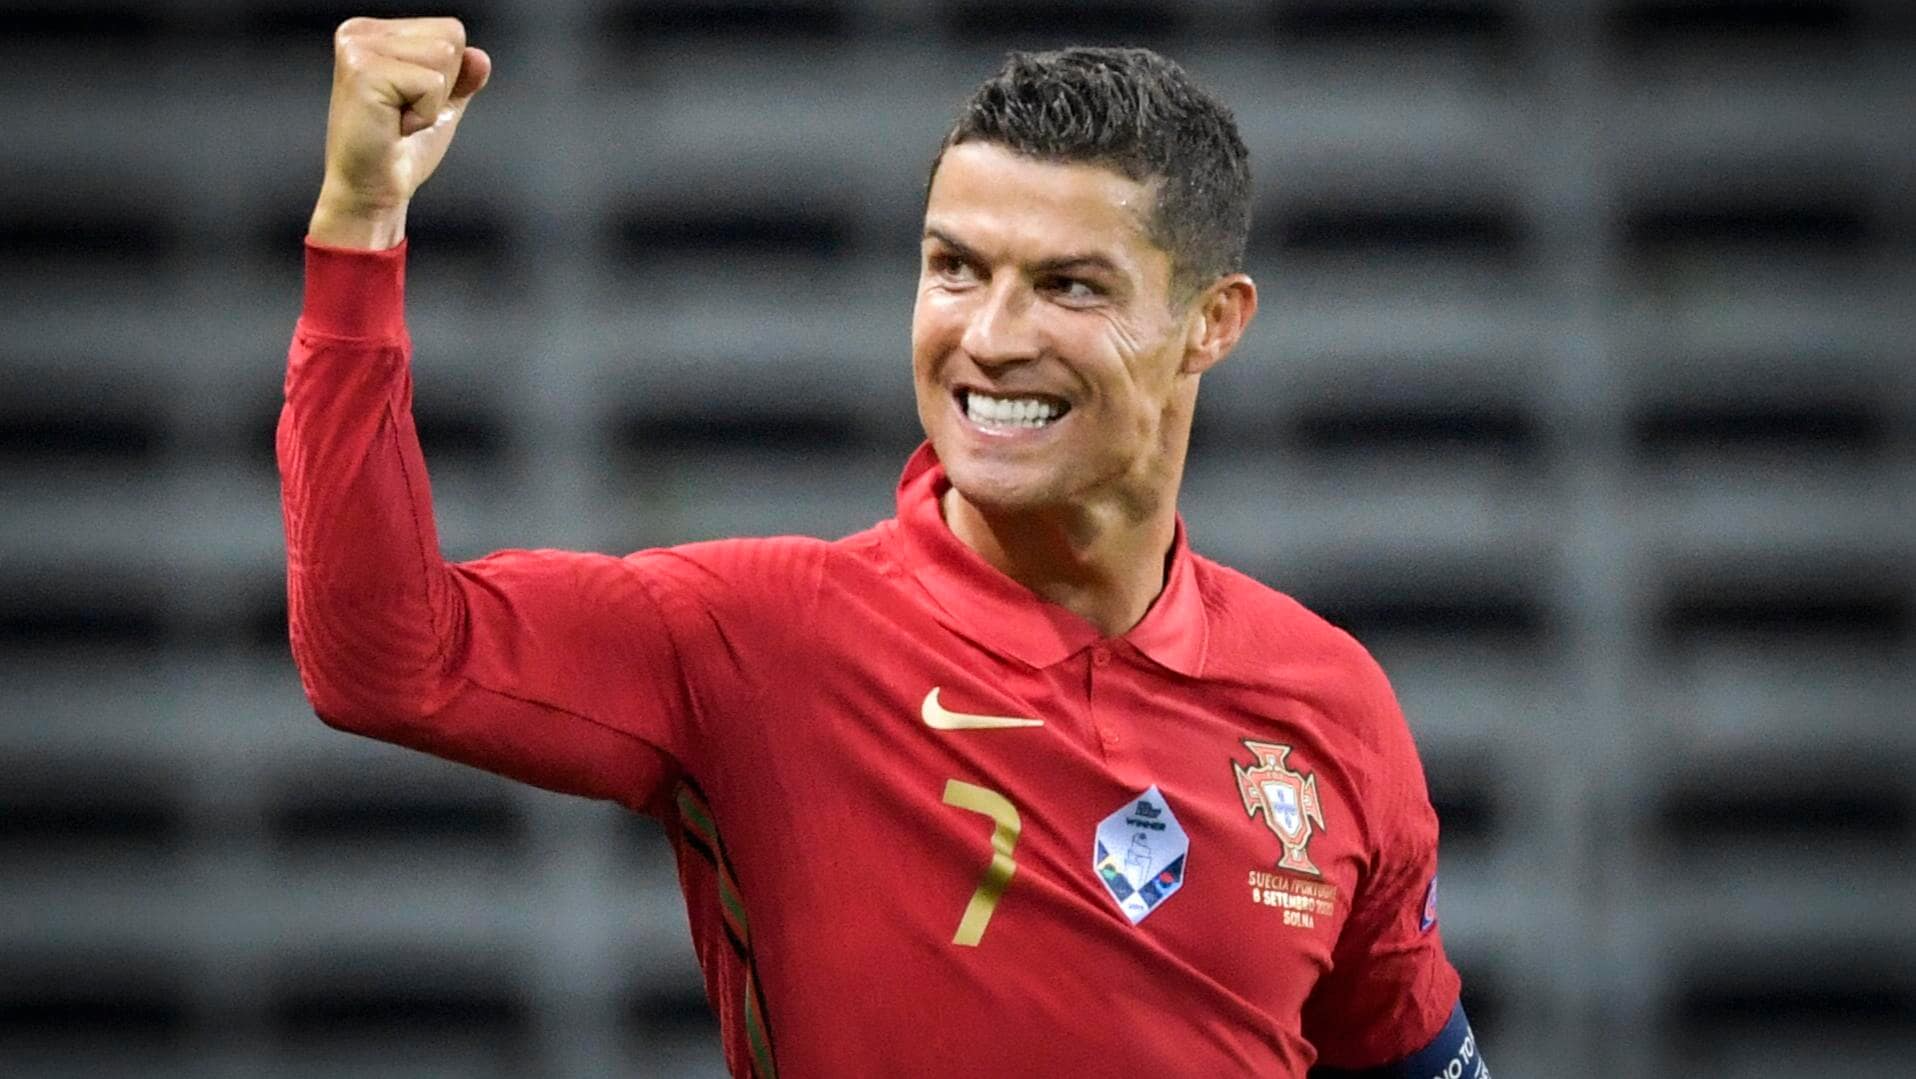 Ronaldo is First Player in History to Play 200 Matches for National Team